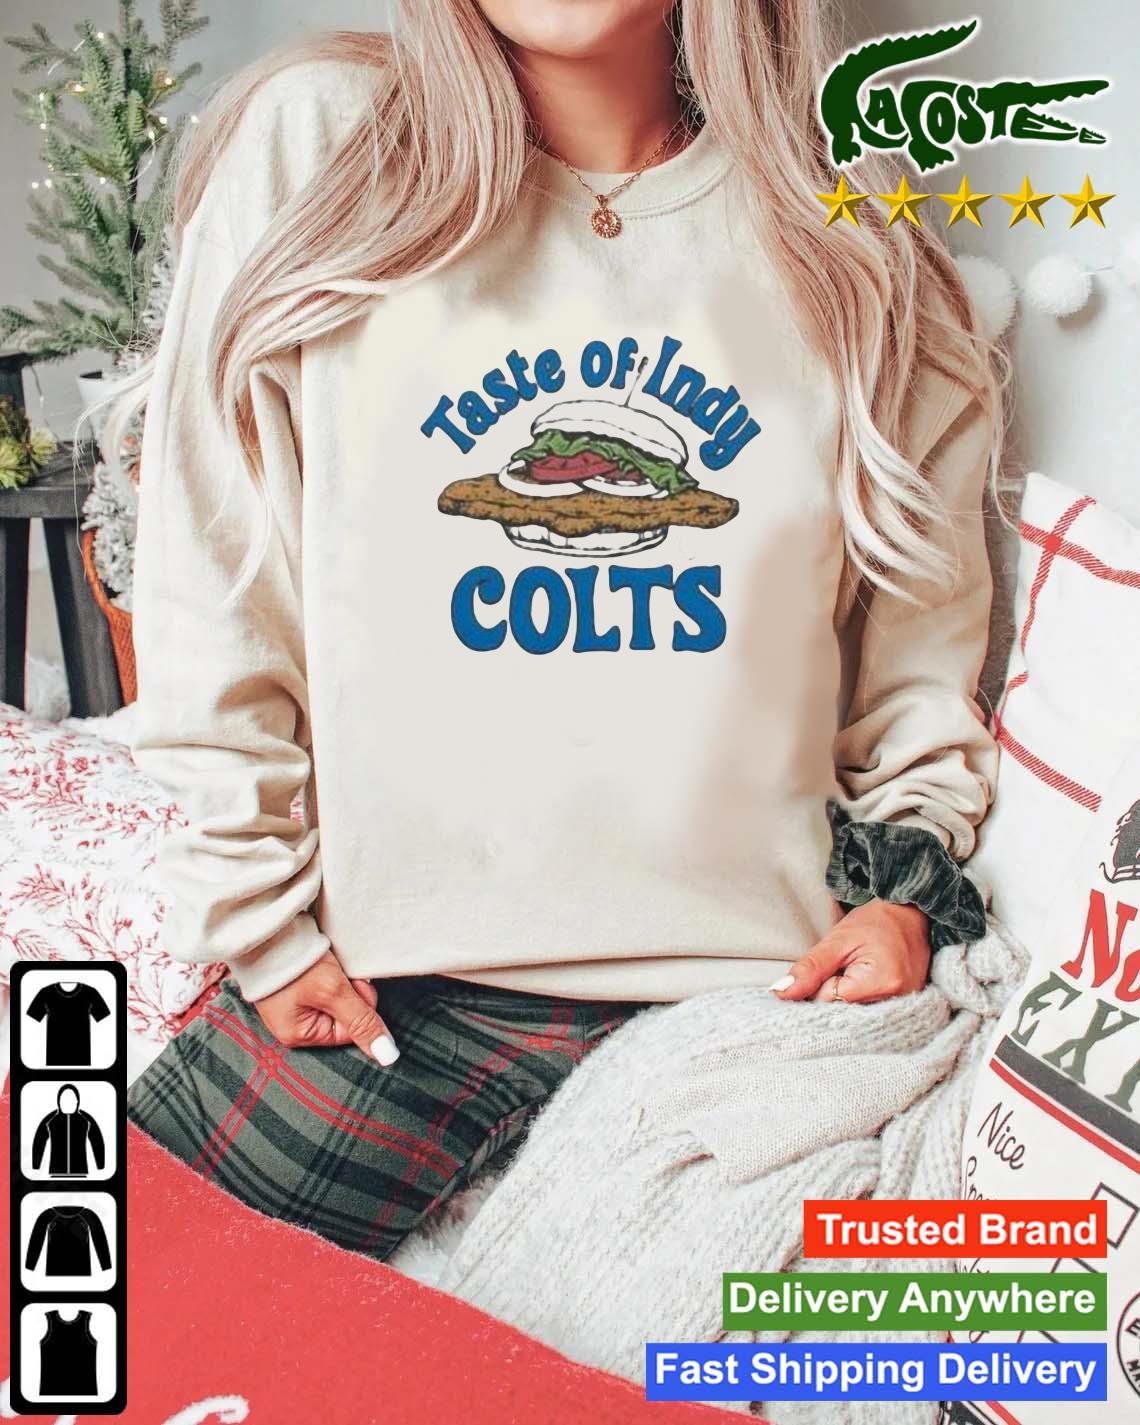 Taste Of Indy Indianapolis Colts Sweatshirt